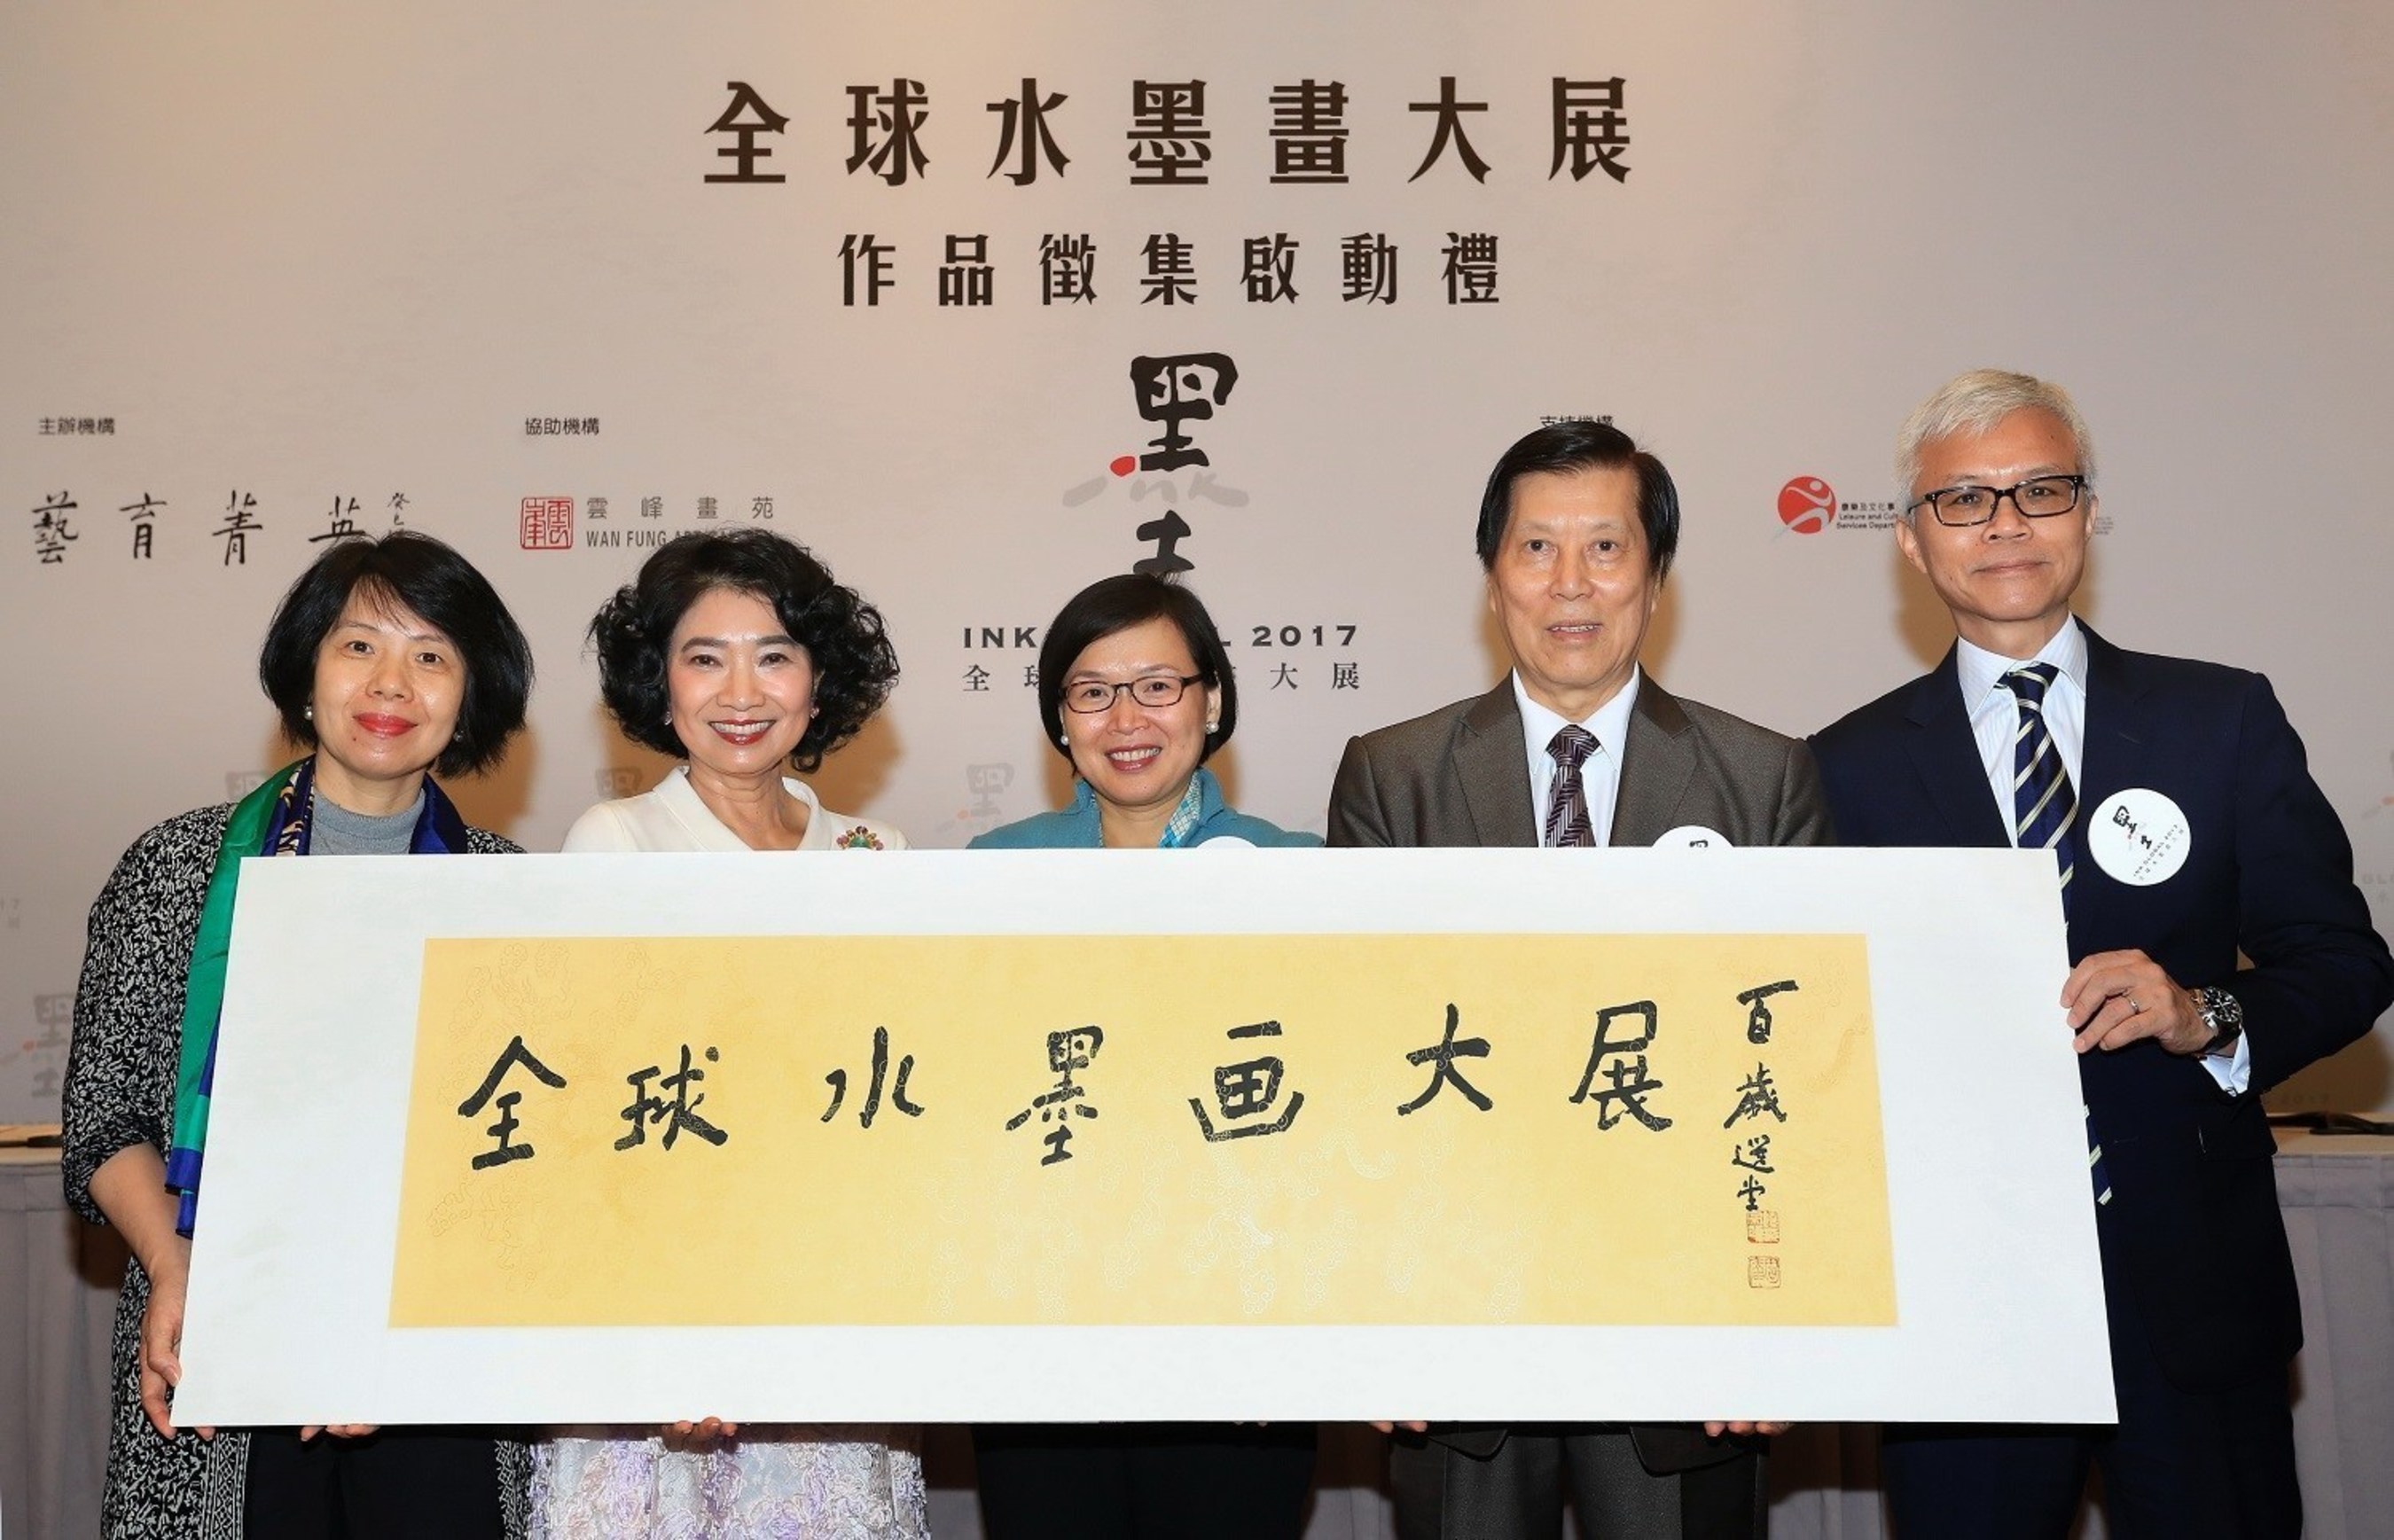 Professor Jao Tsung-I's calligraphy of the Chinese event title of INK GLOBAL  unveiled by Officiating Guests, (From left) Ms Peng Jie, Director of the Department of Publicity, Cultural and Sports Affairs, Liaison Office of the Central People's Government in the HKSAR; Mrs Nellie Fong, Chairman of Young Artists Development Foundation; Ms Florence Hui, Under Secretary for Home Affairs; Dr Kwok Homun, Curator of Ink Global and Dr Louis Ng, Deputy Director (Culture), Lecture and Cultural Services Department.